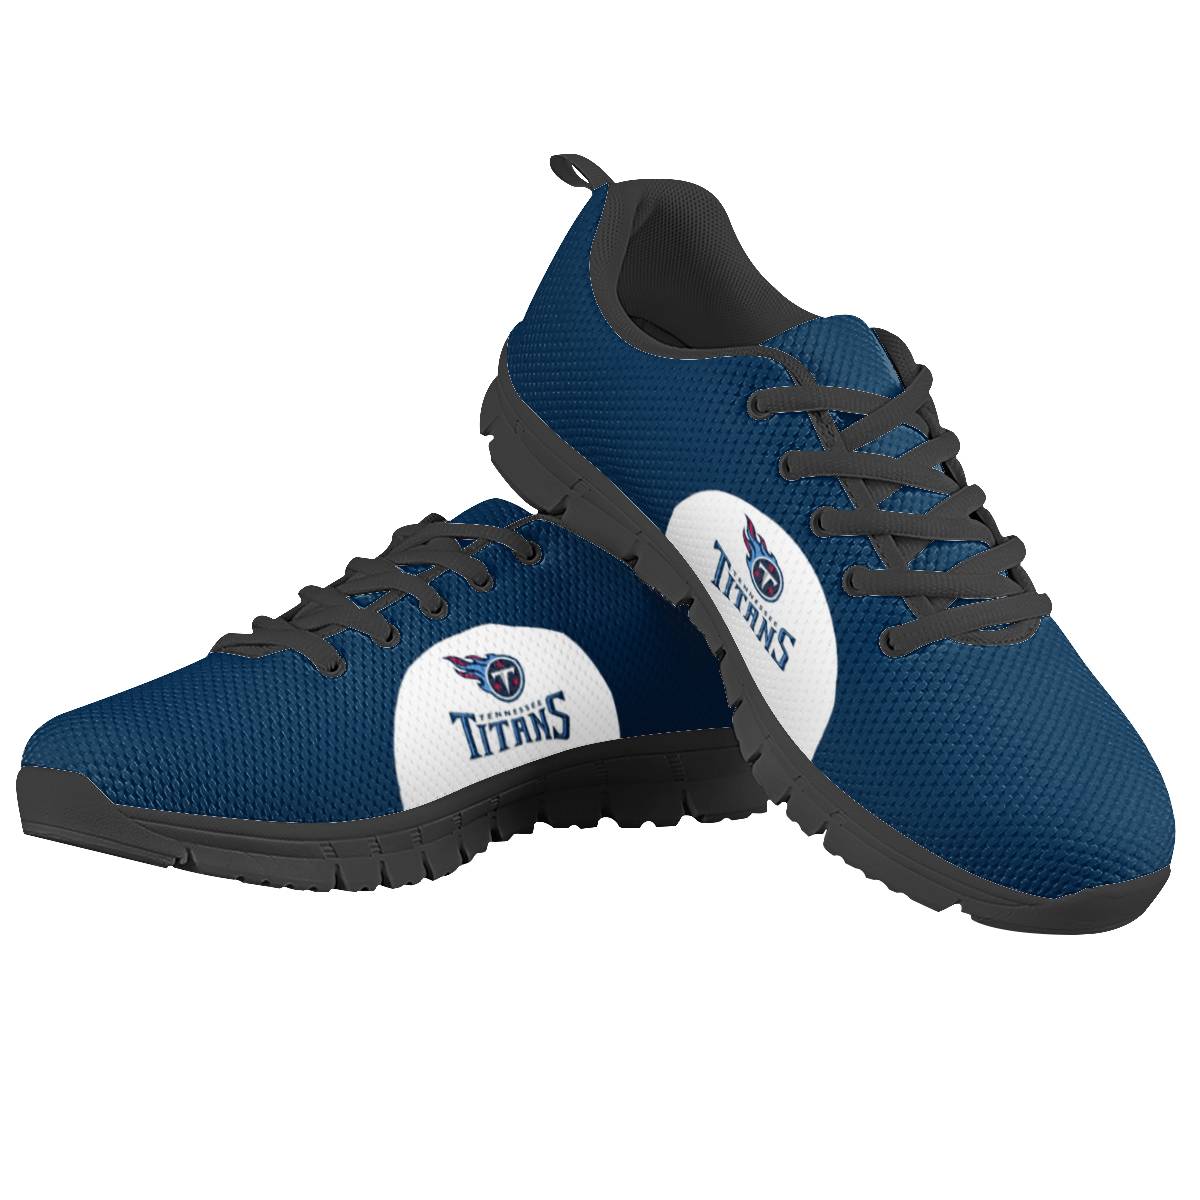 Men's Tennessee Titans AQ Running Shoes 002